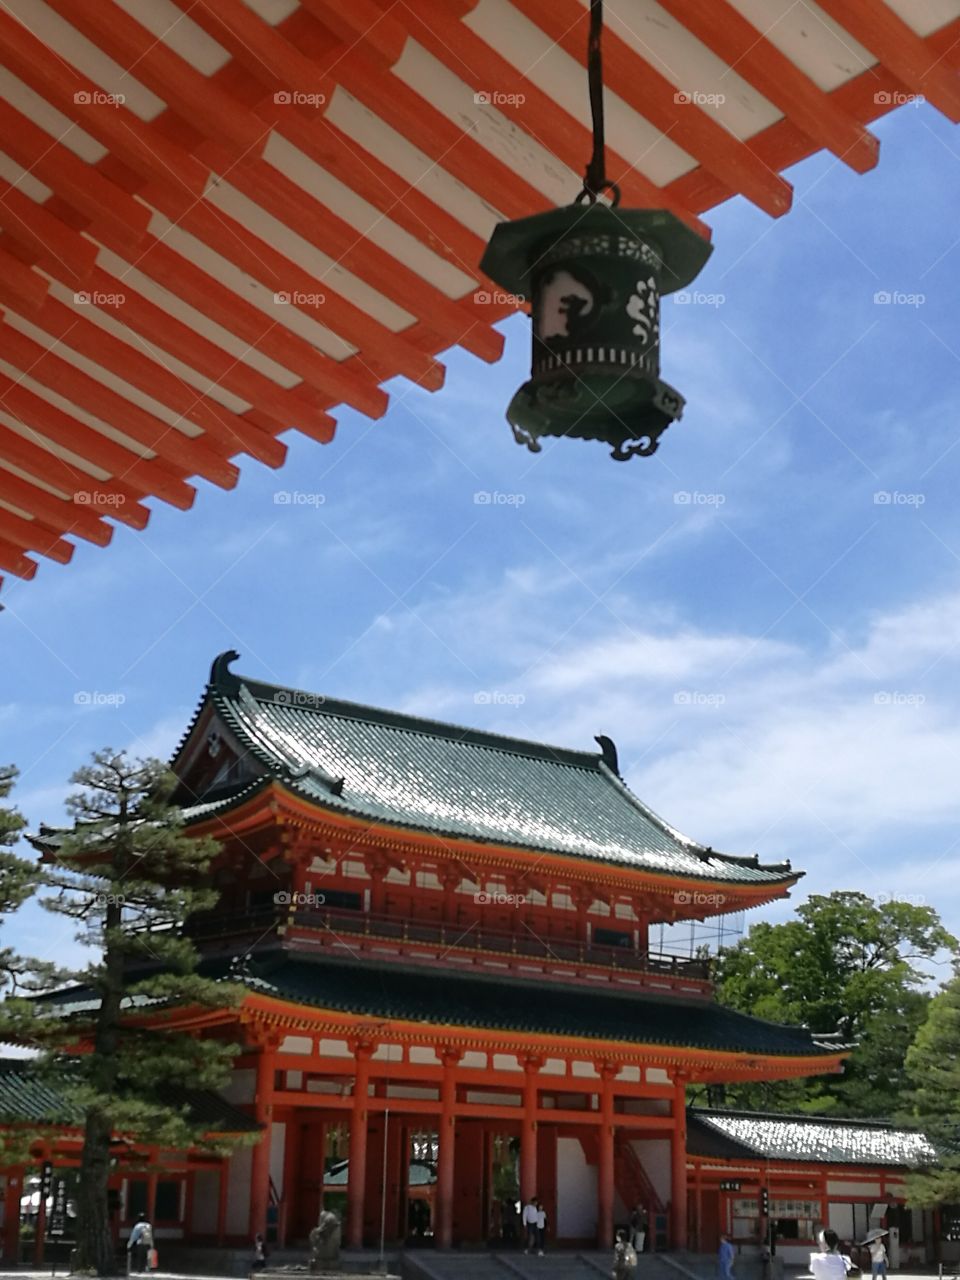 JAPANESE TRADITIONAL ARCHITECTURE